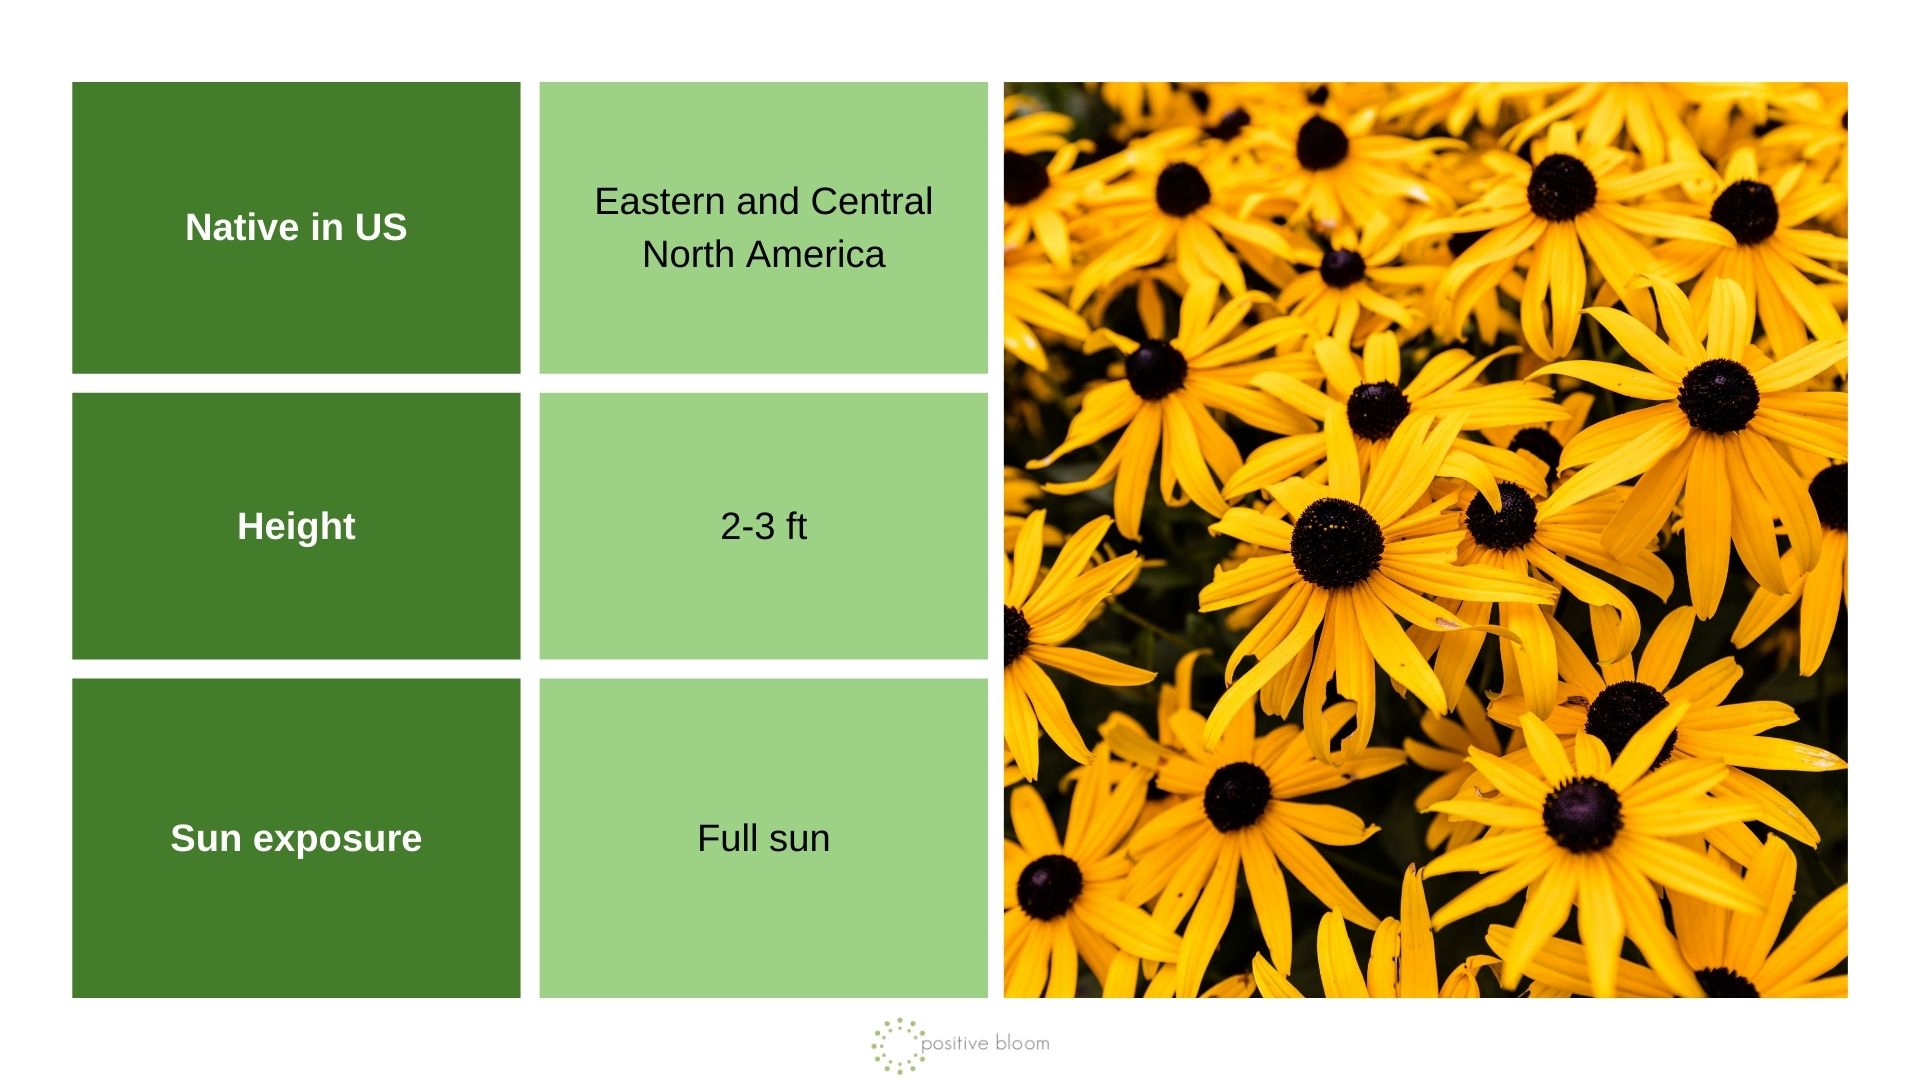 _Black-Eyed Susan info chart and photo